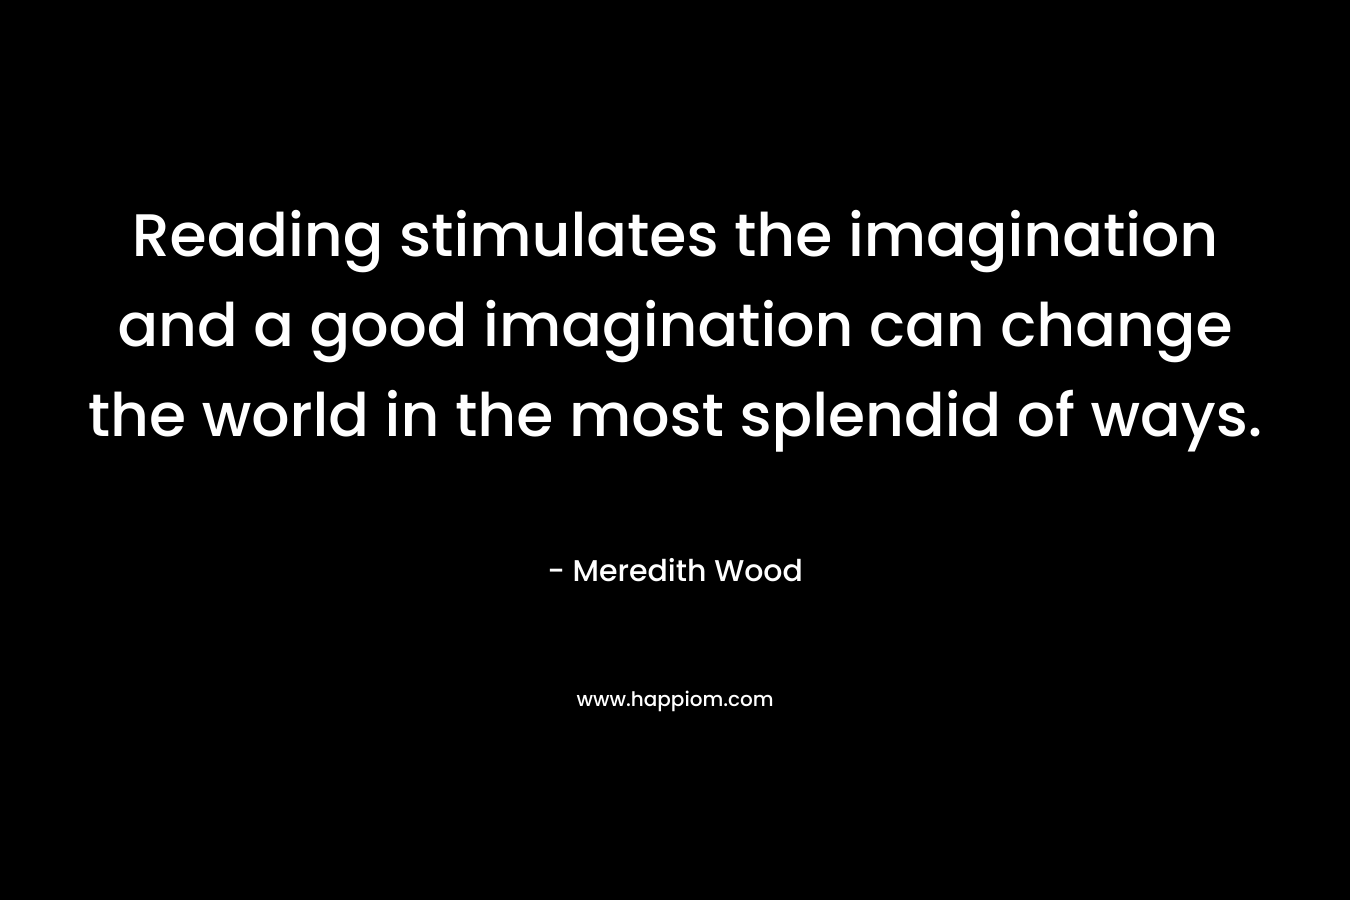 Reading stimulates the imagination and a good imagination can change the world in the most splendid of ways.